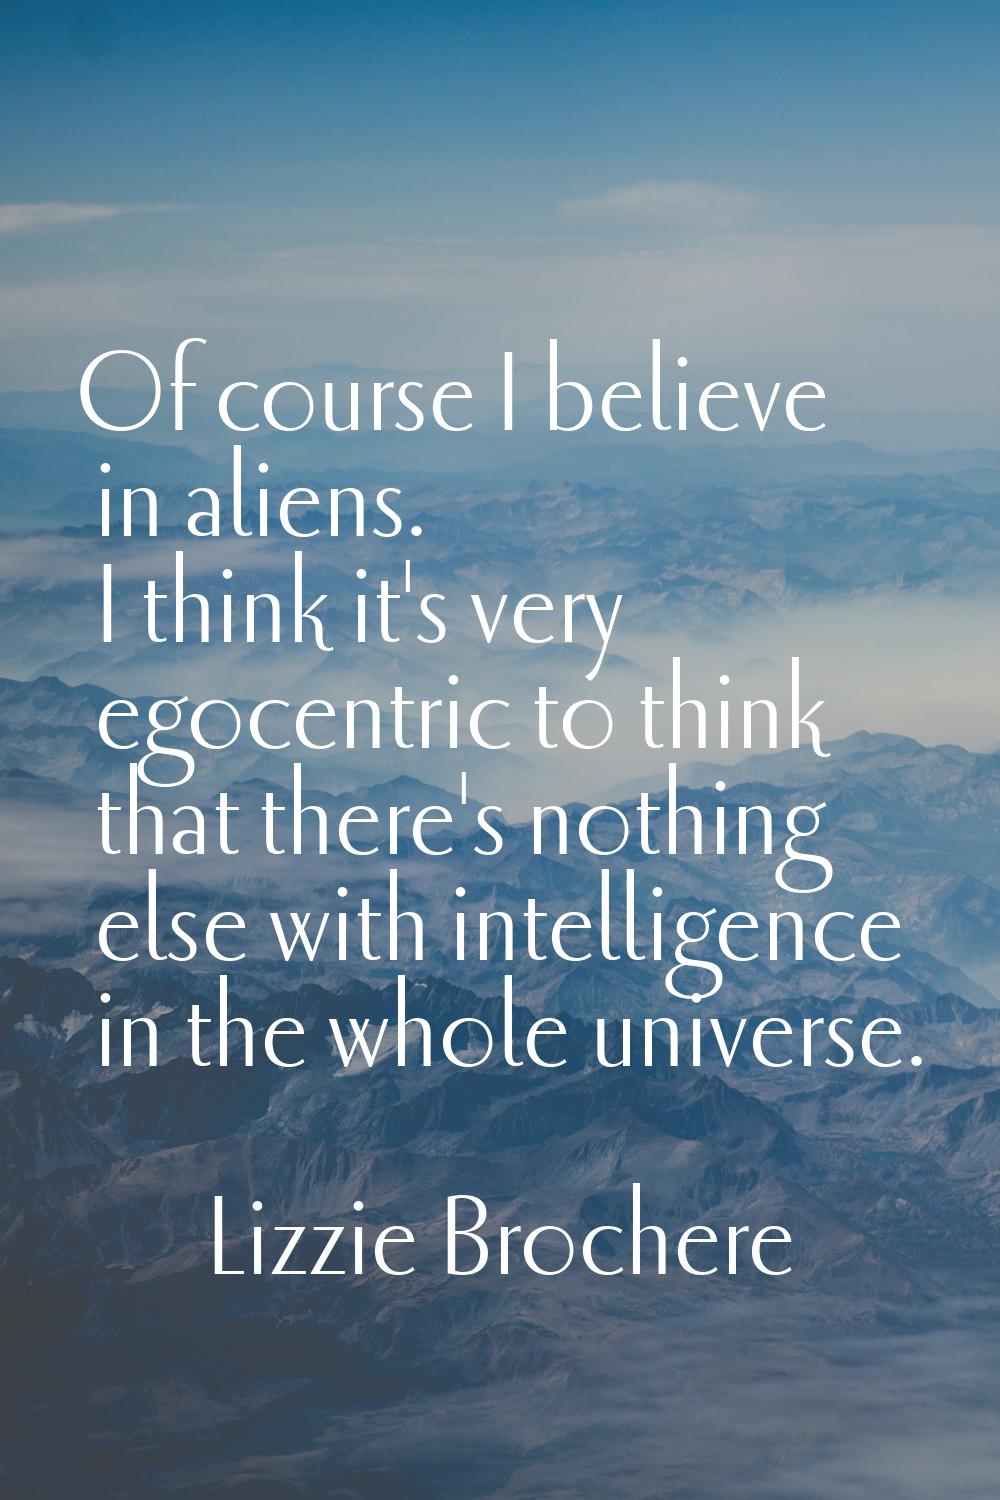 Of course I believe in aliens. I think it's very egocentric to think that there's nothing else with